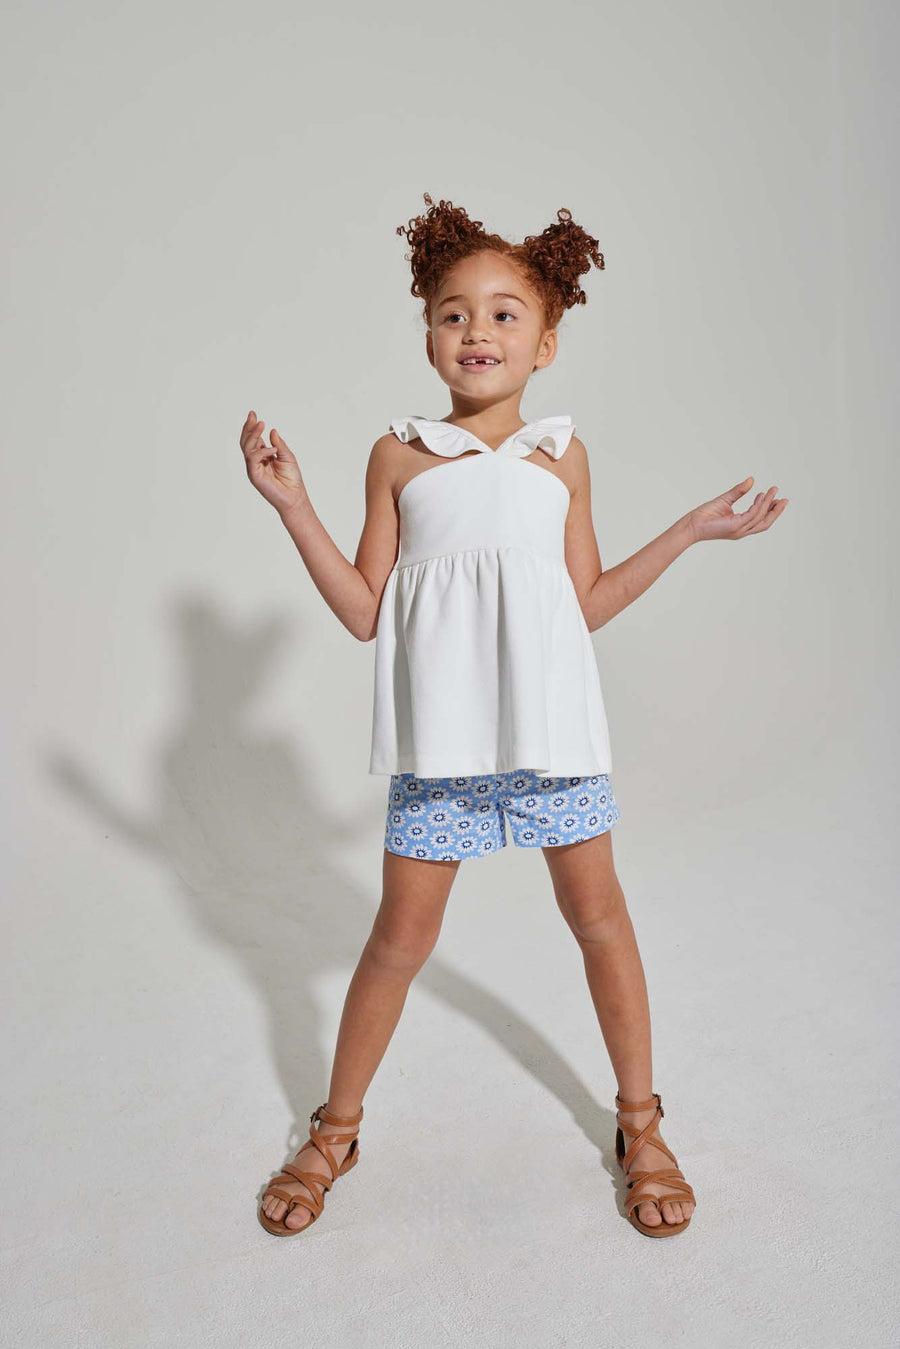 tween girls white pique top with ruffled sleeves